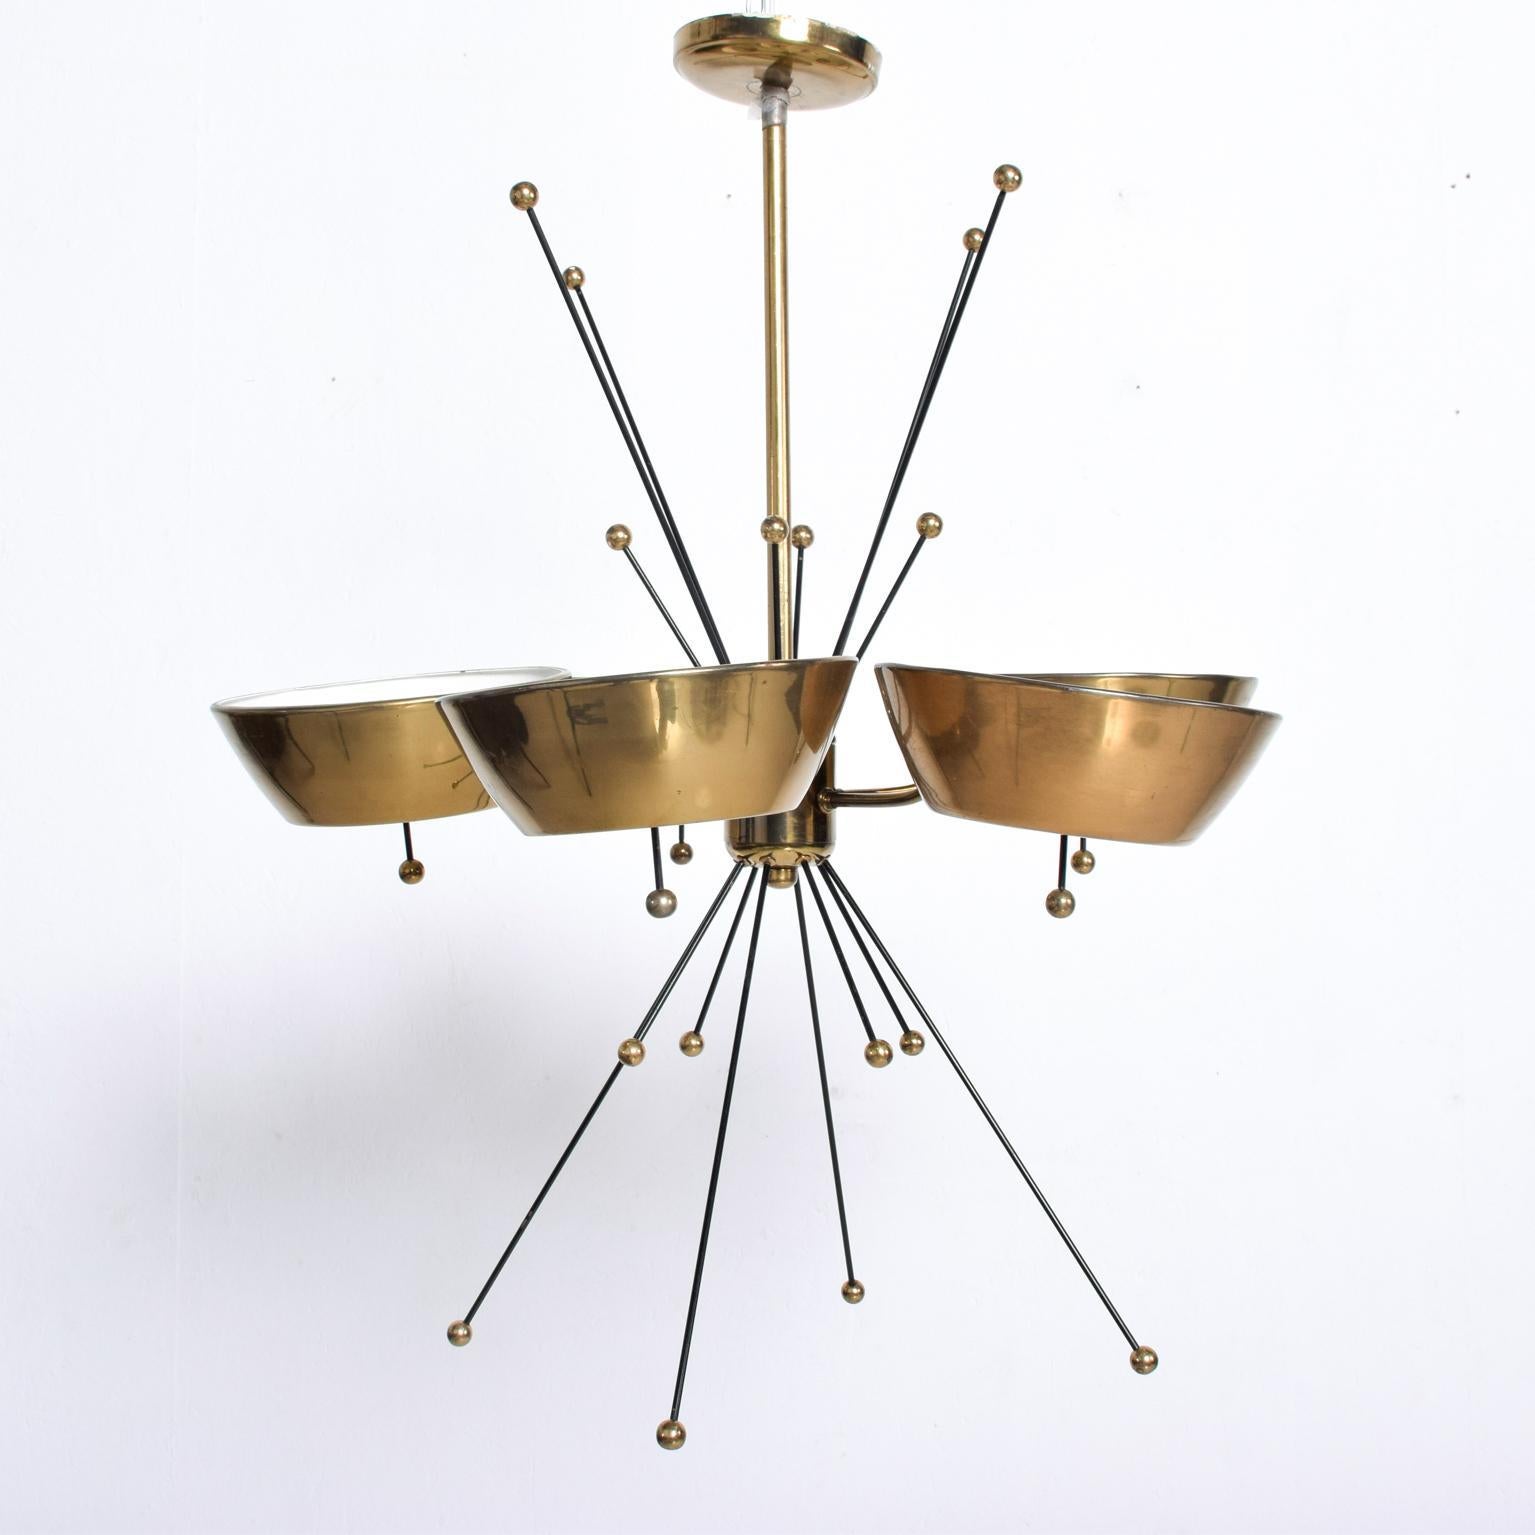 We are pleased to offer for your consideration a beautiful chandelier made in Italy, circa the 1960s. Brass with glass and iron rods. Sputnik style. Unmarked, no information present on the maker. Attributed to Paavo Tynell based on style.